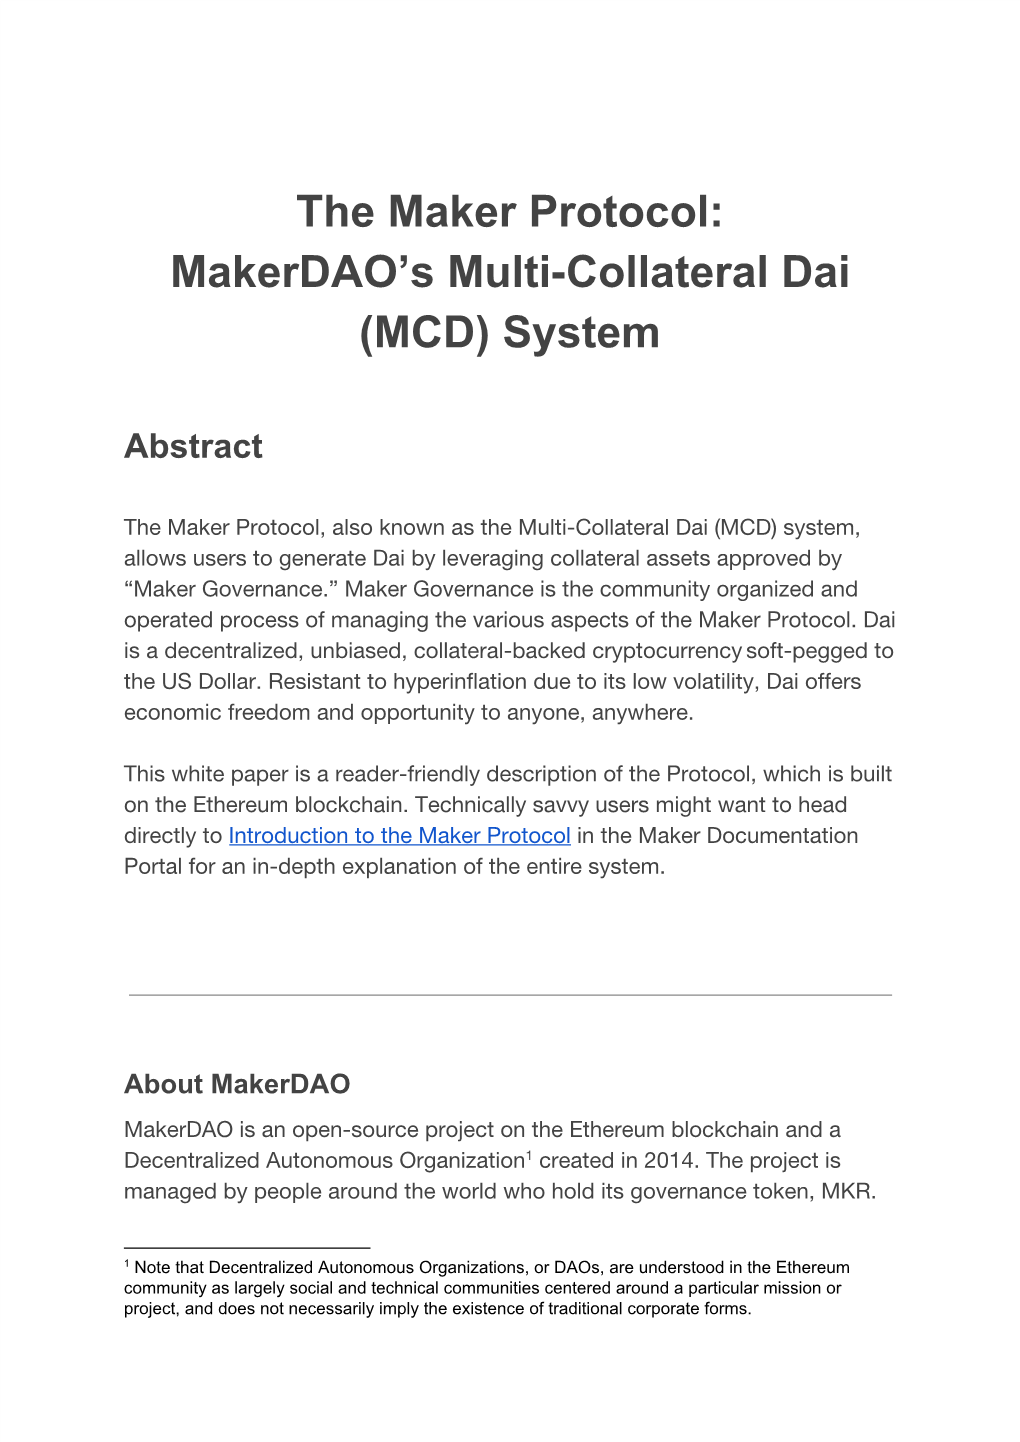 The Maker Protocol: Makerdao's Multi-Collateral Dai (MCD) System